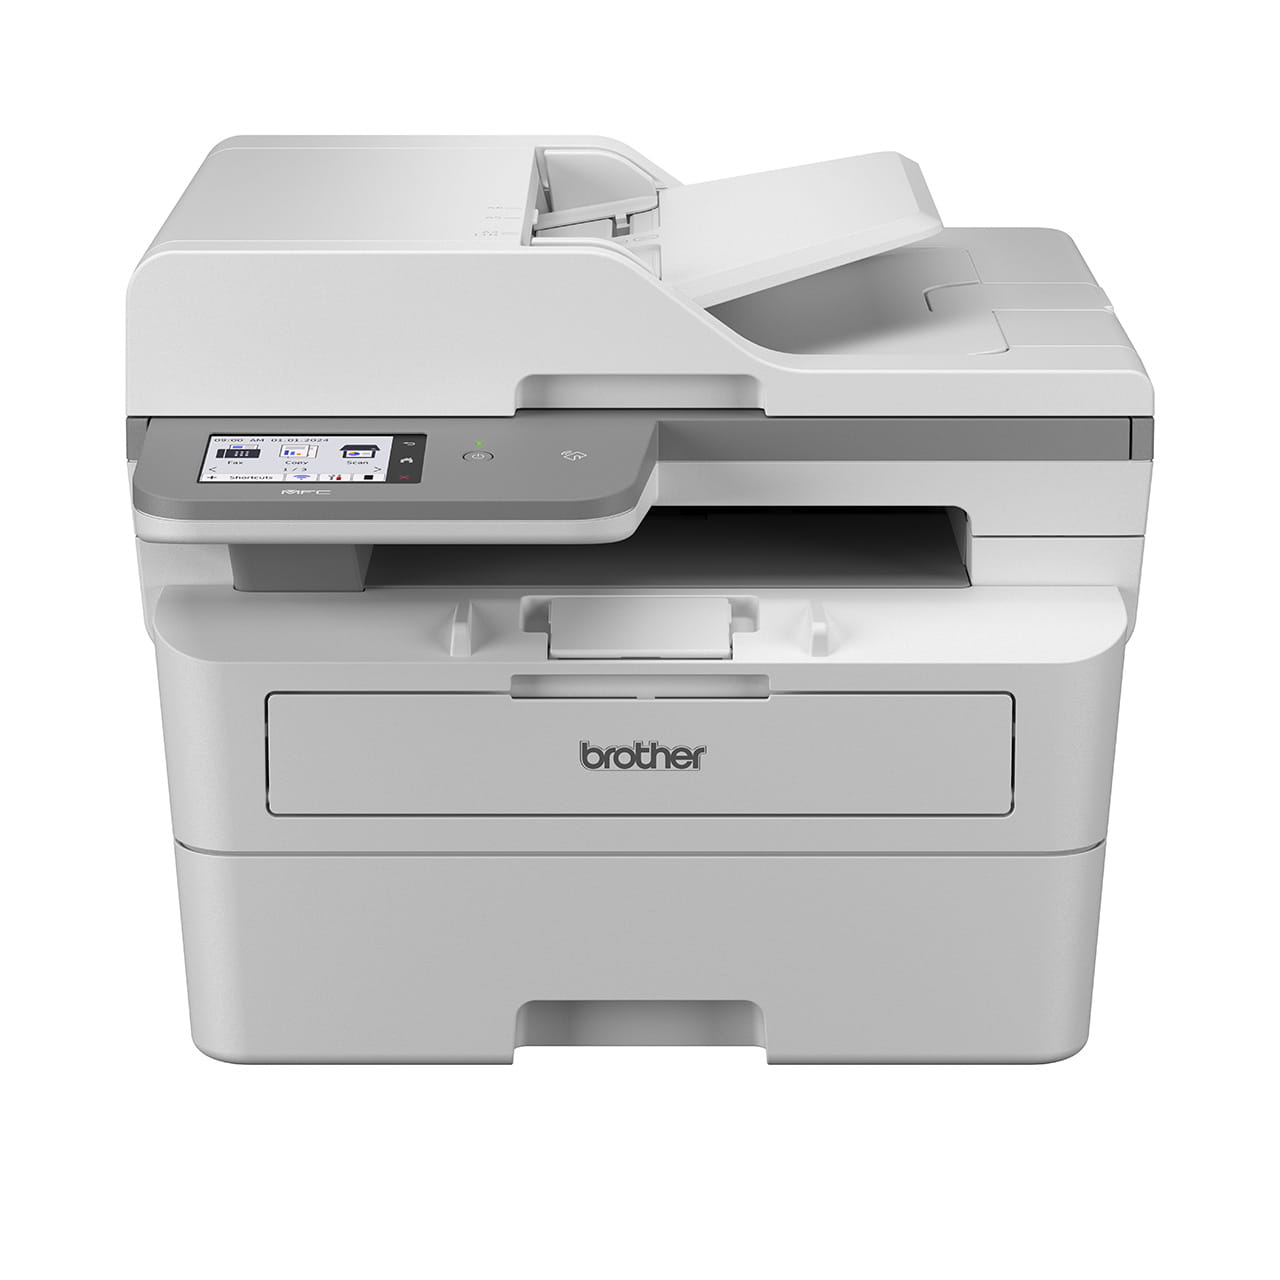 Brother MFC-L2920DW Mono Laser Printer Front View